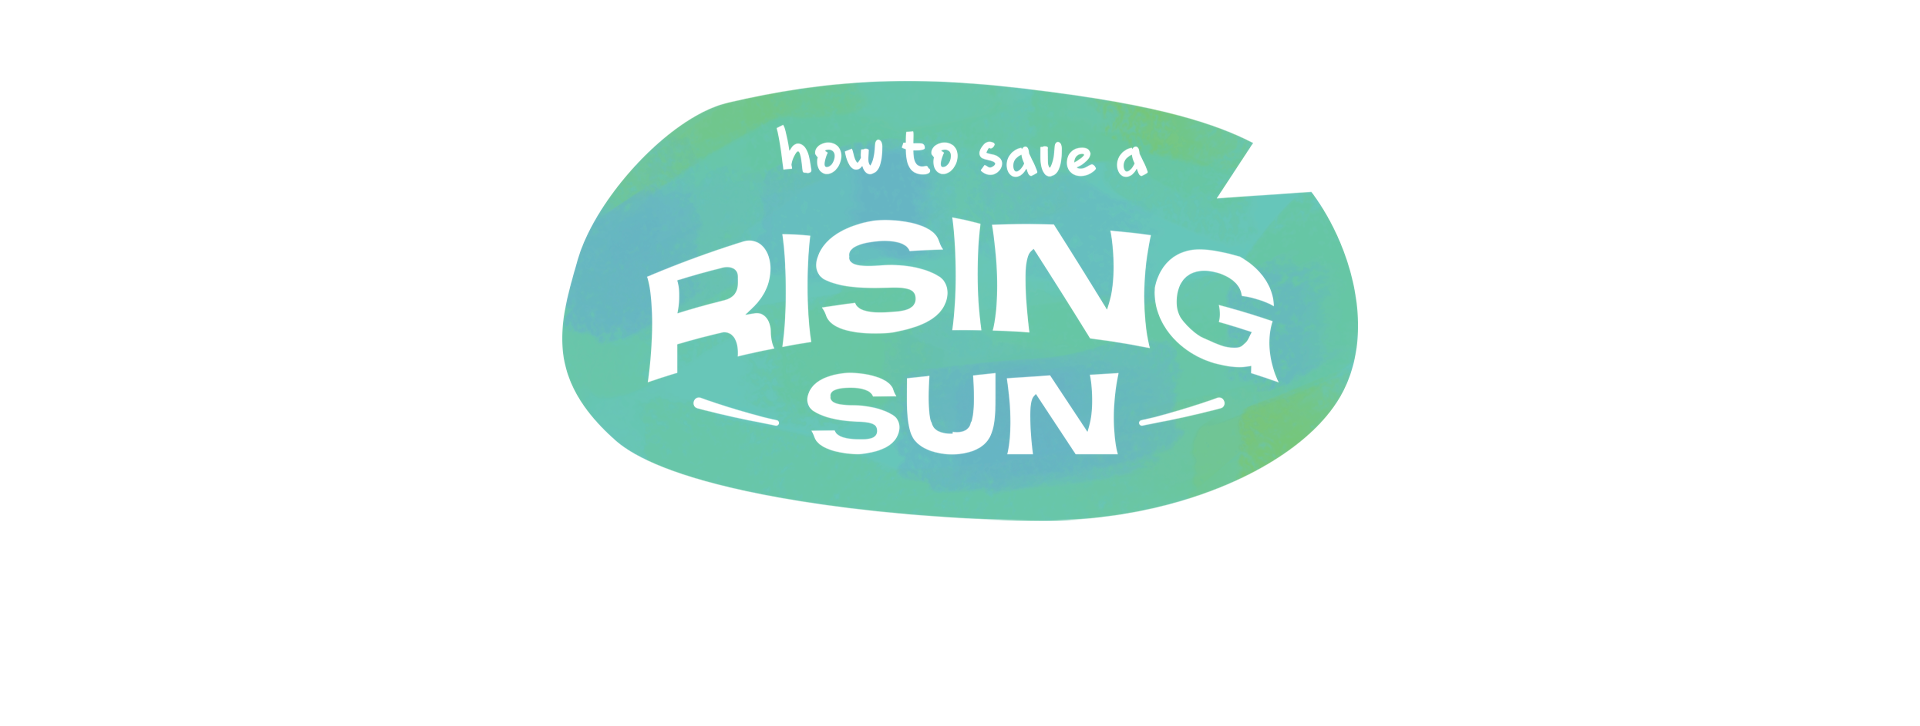 How to save a Rising Sun